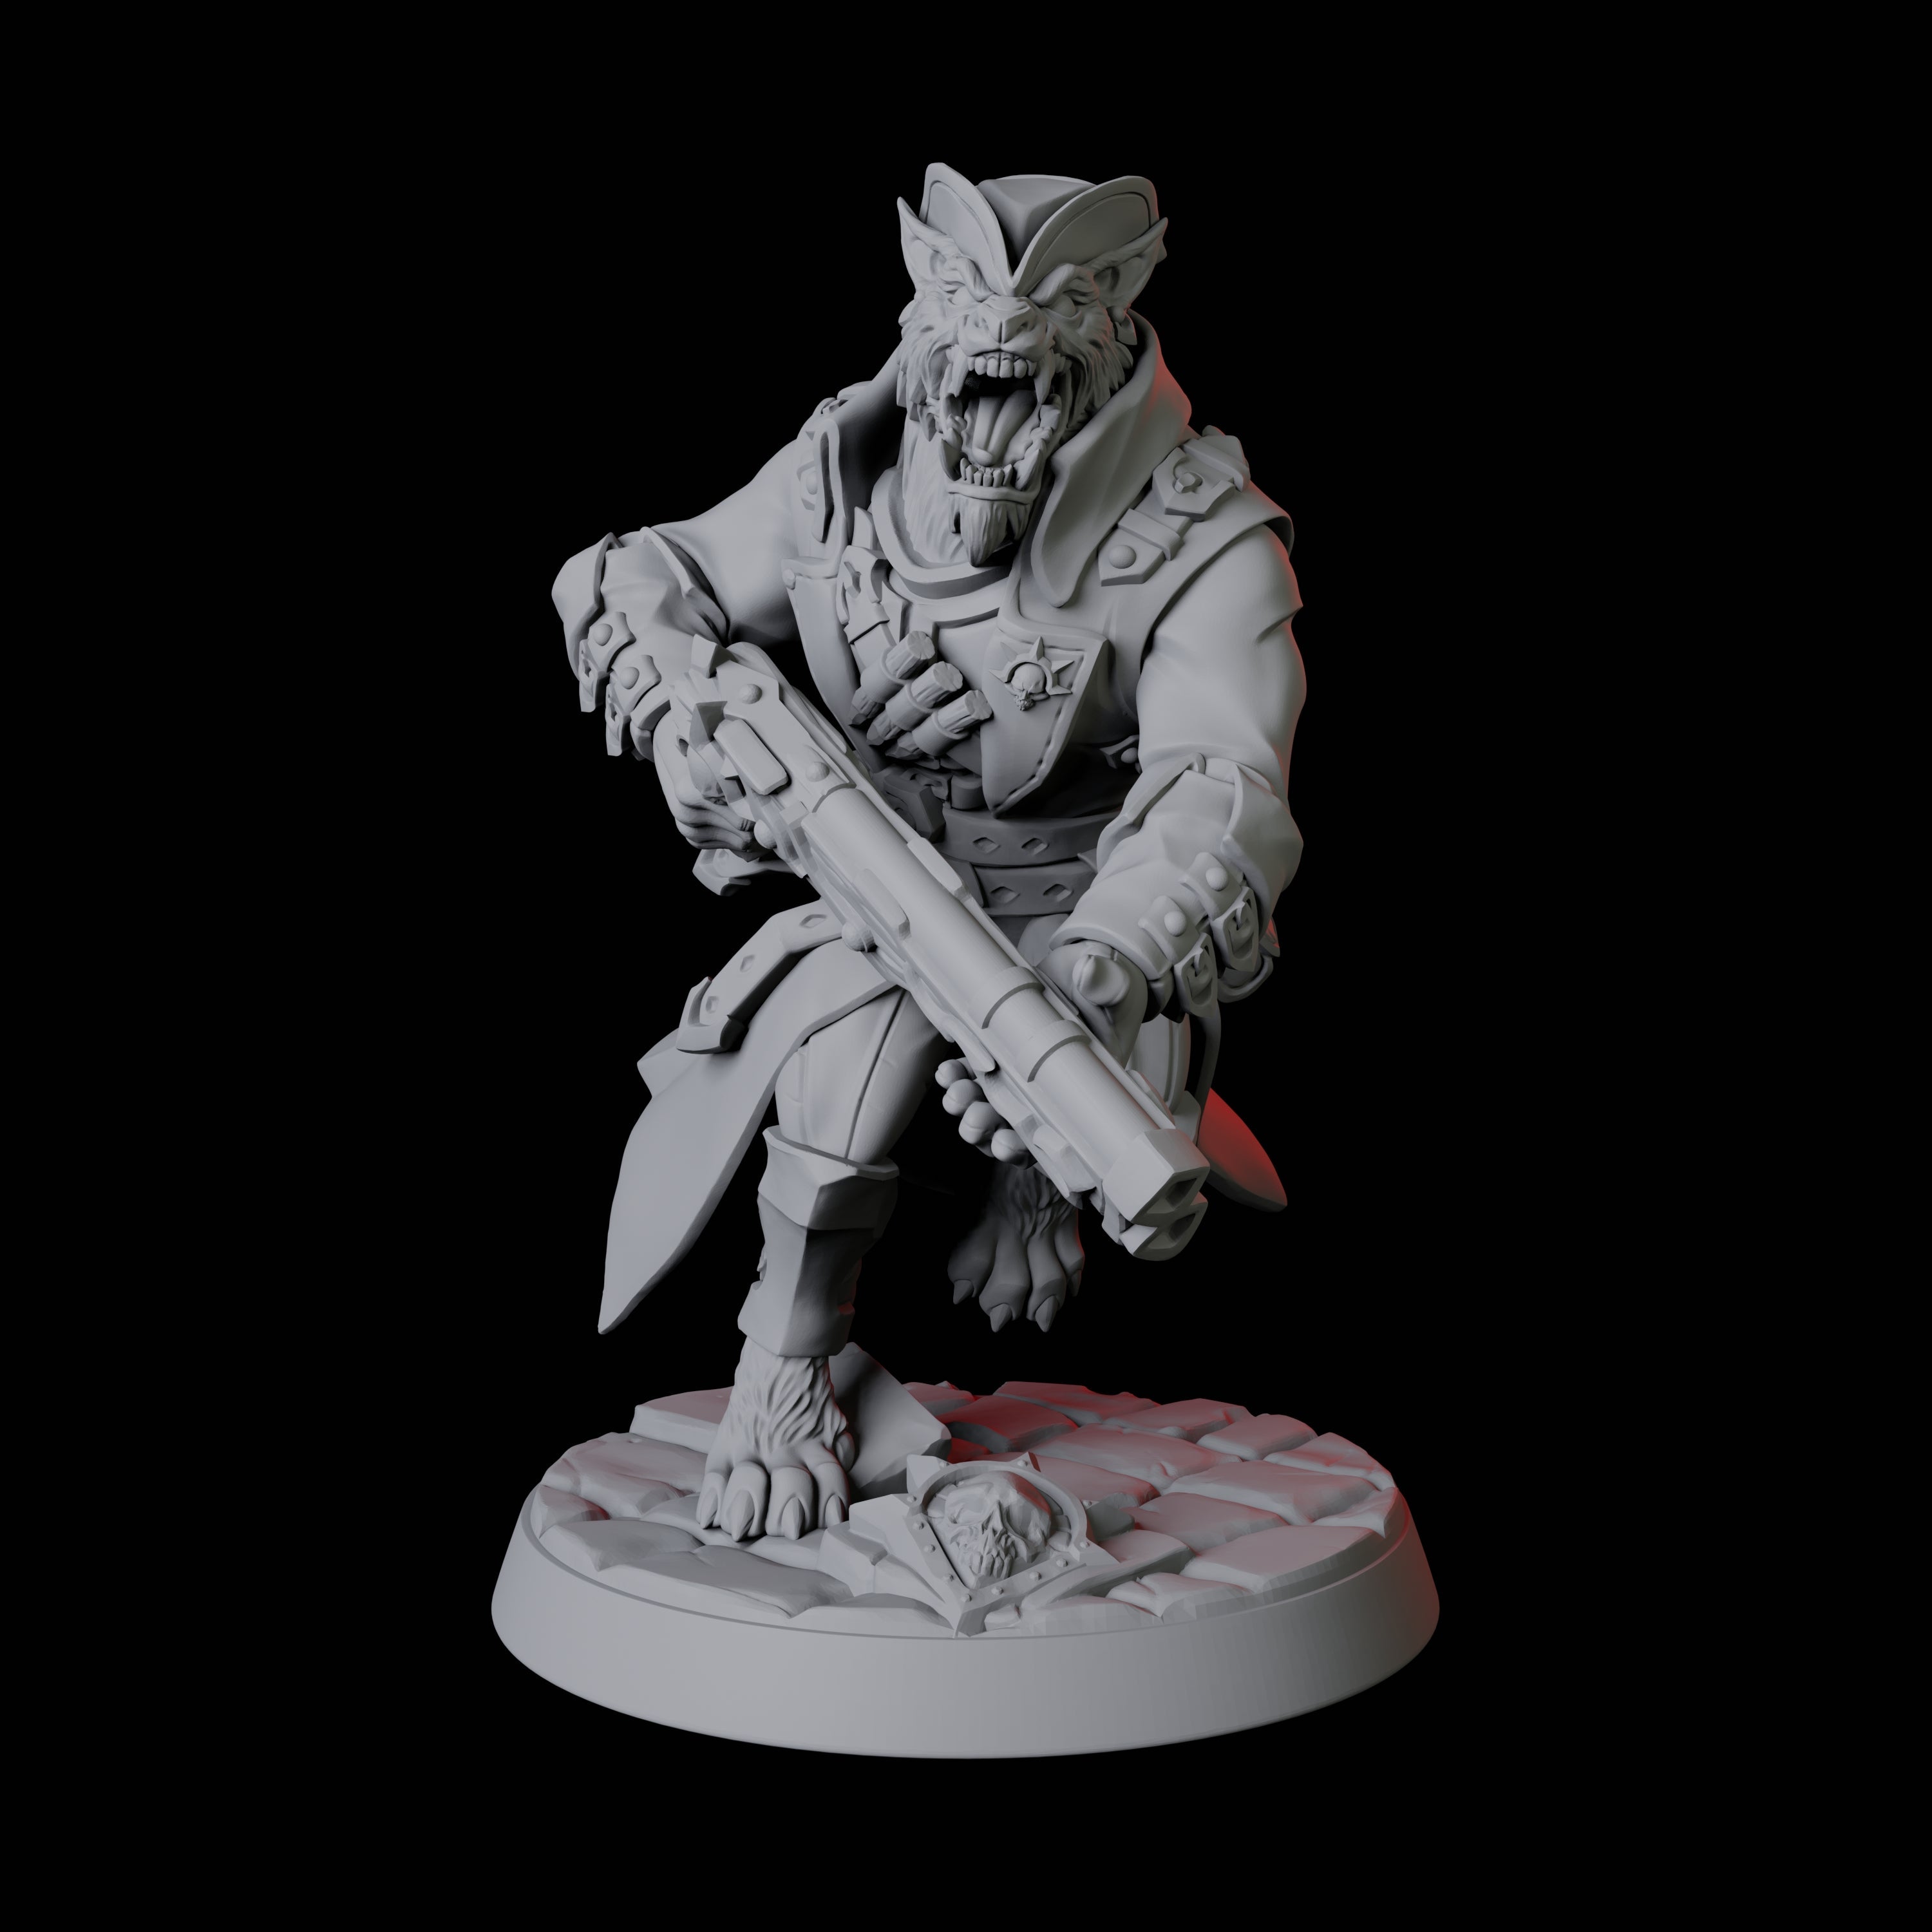 Werewolf Vampire Hunter D Miniature for Dungeons and Dragons, Pathfinder or other TTRPGs